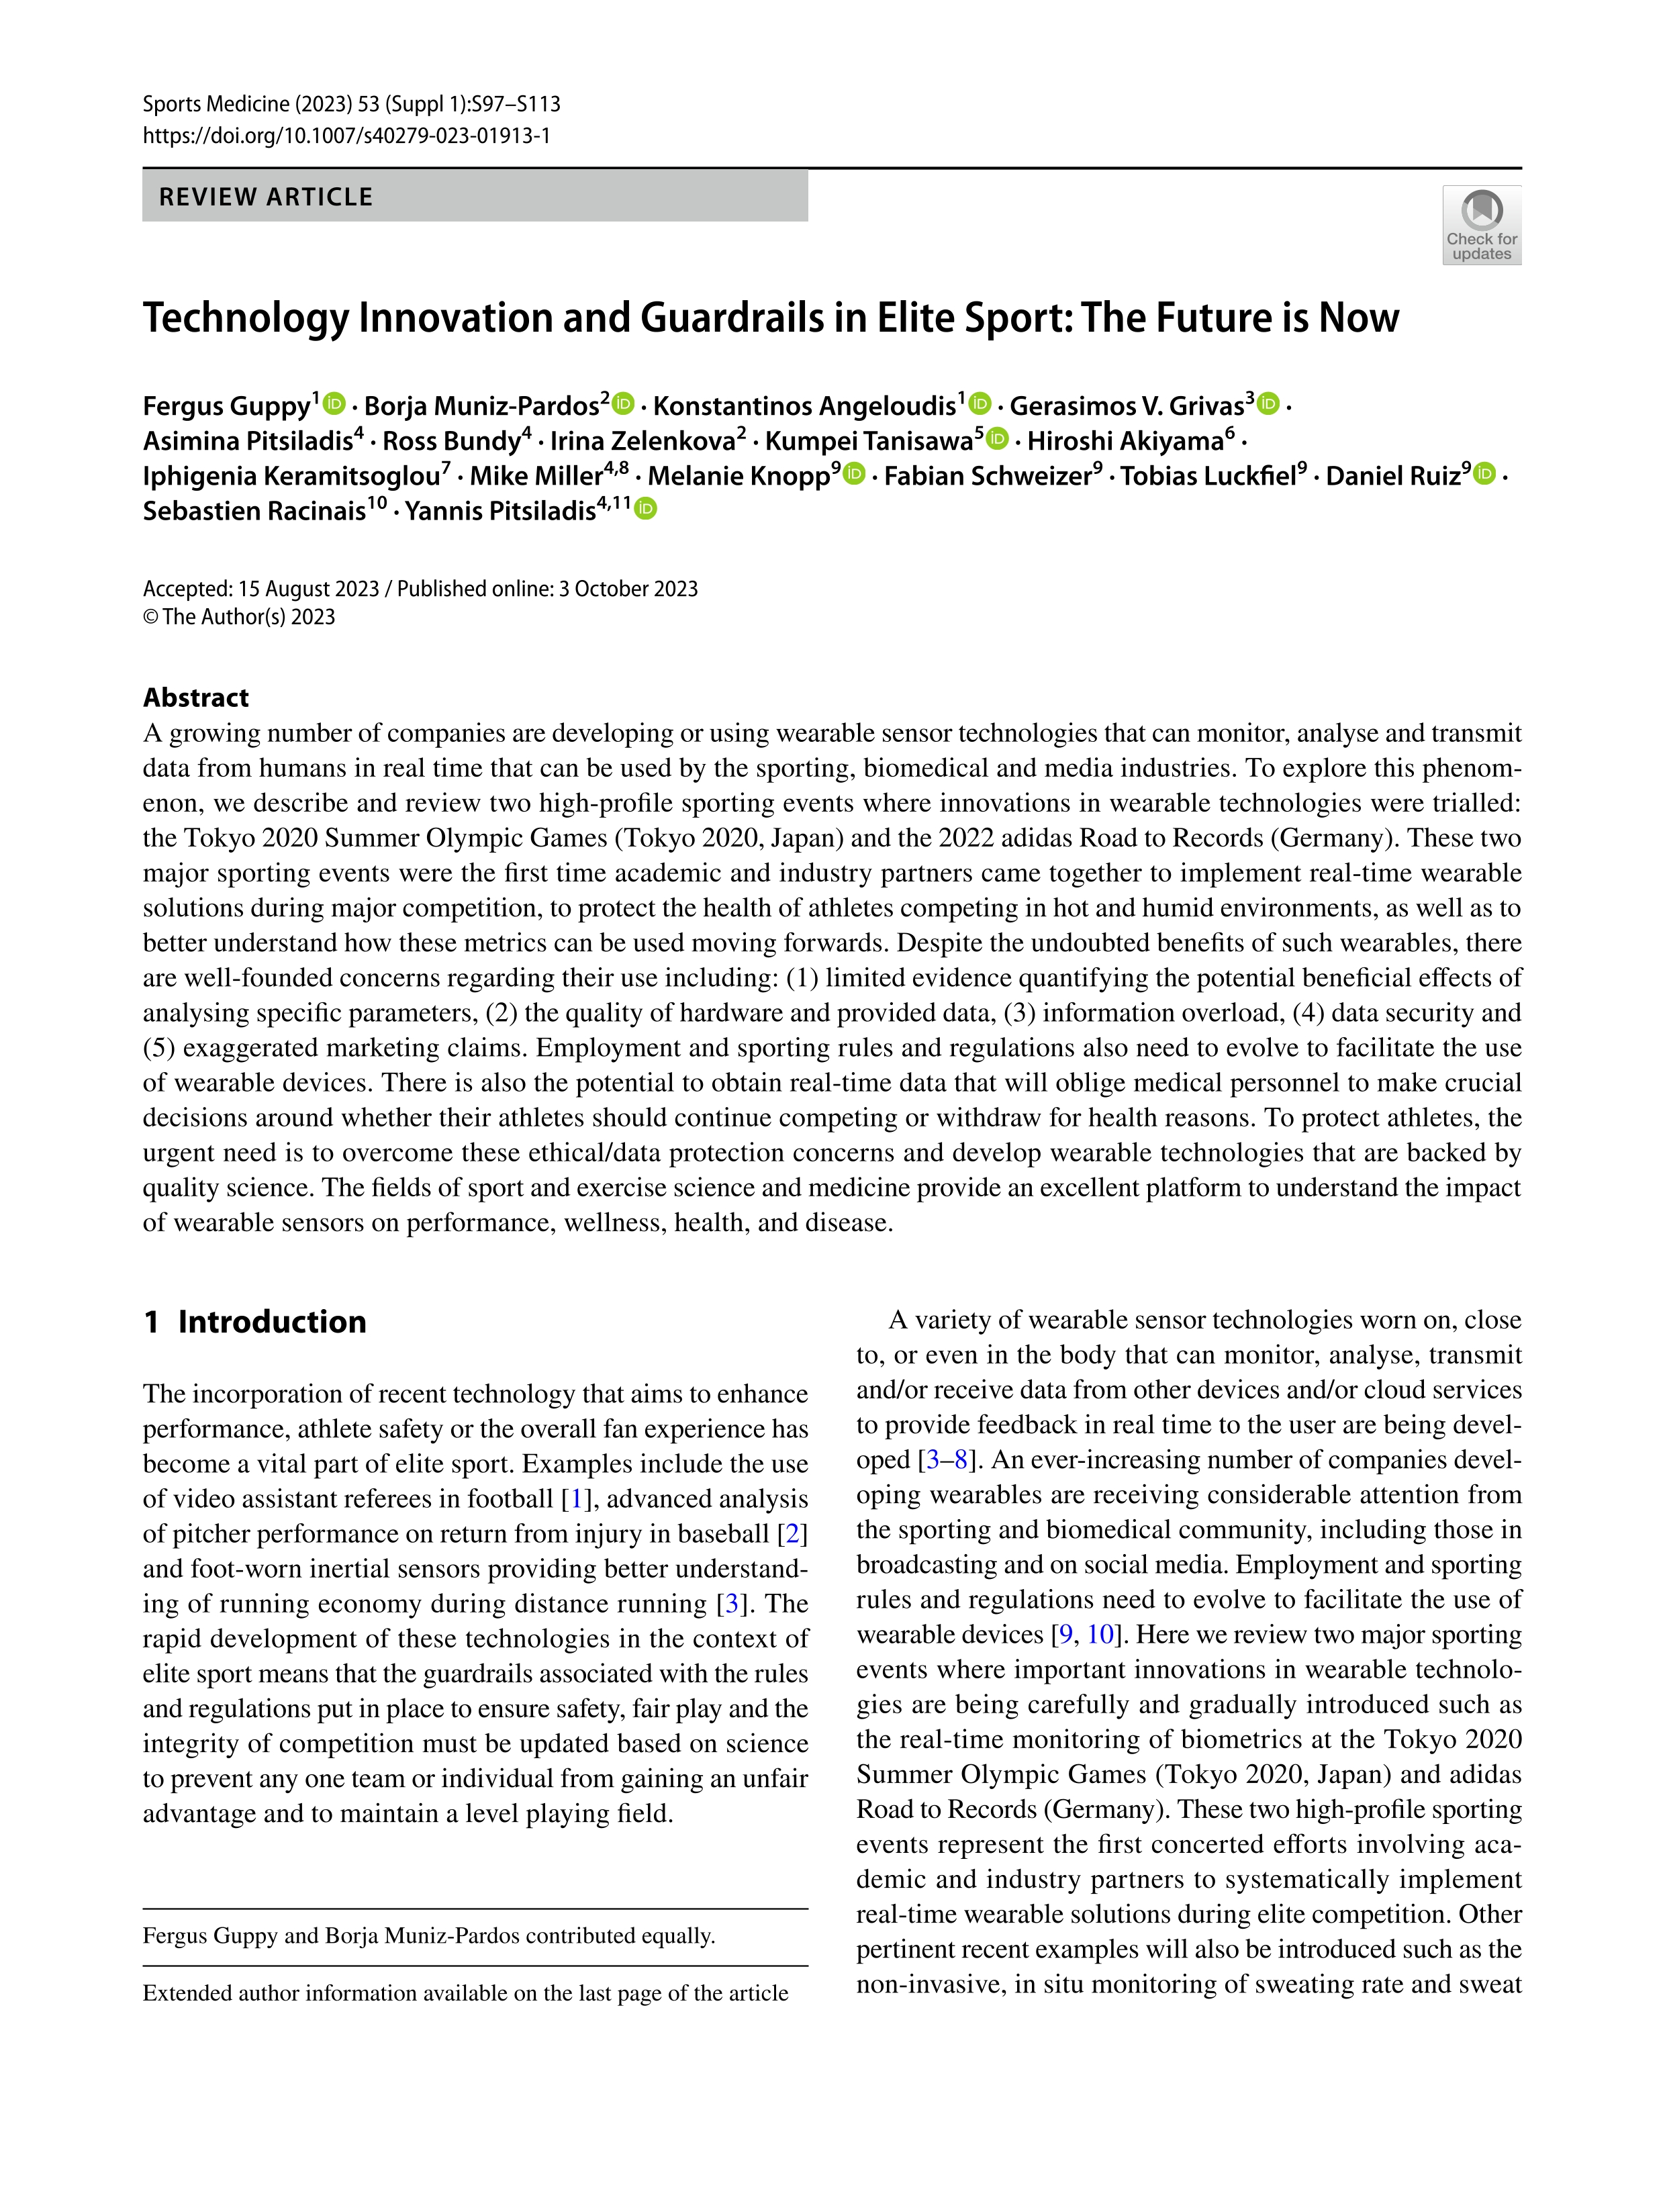 Technology Innovation and Guardrails in Elite Sport: The Future is Now